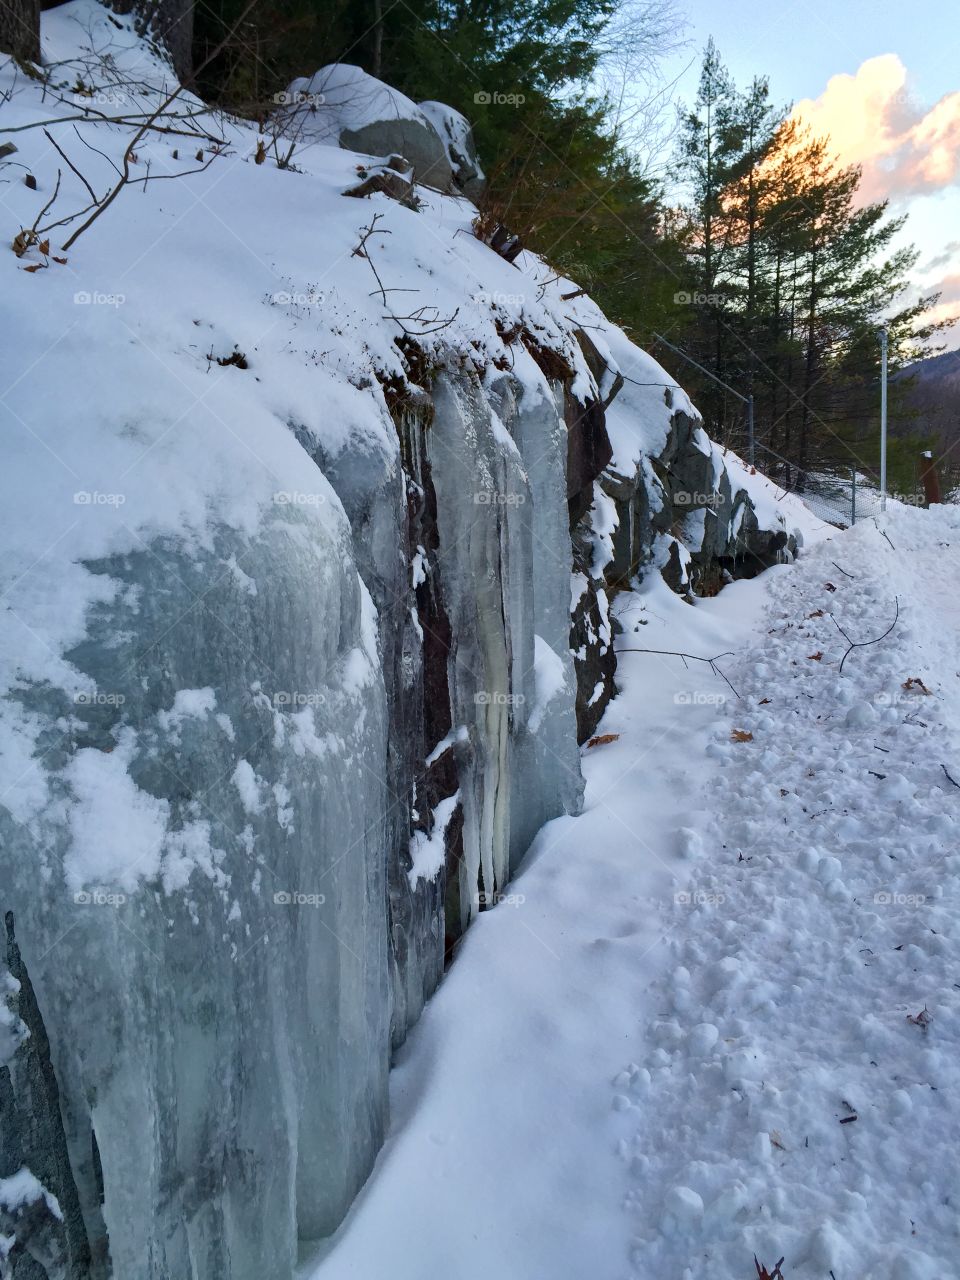 New Hampshire ice . Ice formations from New Hampshire winter 2015